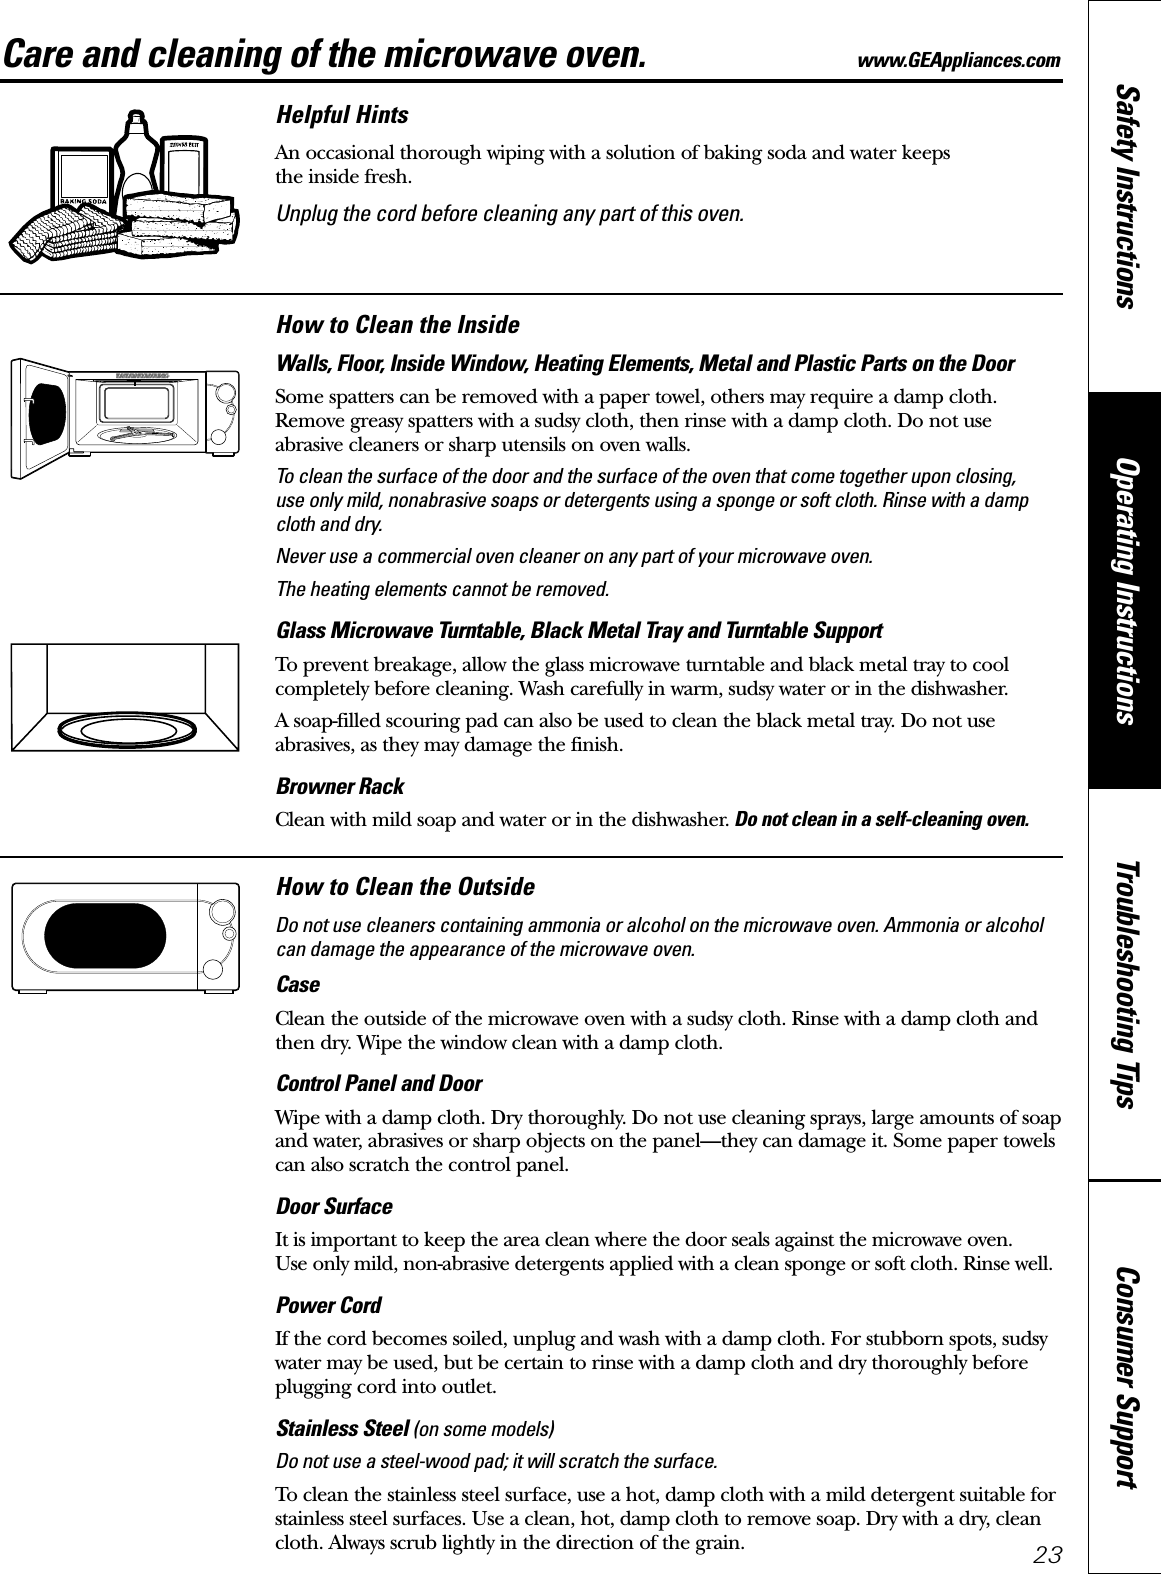 Consumer SupportTroubleshooting TipsOperating InstructionsSafety Instructions23Care and cleaning of the microwave oven. www.GEAppliances.comHelpful HintsAn occasional thorough wiping with a solution of baking soda and water keeps the inside fresh.Unplug the cord before cleaning any part of this oven.How to Clean the InsideWalls, Floor, Inside Window, Heating Elements, Metal and Plastic Parts on the DoorSome spatters can be removed with a paper towel, others may require a damp cloth.Remove greasy spatters with a sudsy cloth, then rinse with a damp cloth. Do not use abrasive cleaners or sharp utensils on oven walls. To clean the surface of the door and the surface of the oven that come together upon closing, use only mild, nonabrasive soaps or detergents using a sponge or soft cloth. Rinse with a dampcloth and dry.Never use a commercial oven cleaner on any part of your microwave oven.The heating elements cannot be removed.Glass Microwave Turntable, Black Metal Tray and Turntable Support To prevent breakage, allow the glass microwave turntable and black metal tray to coolcompletely before cleaning. Wash carefully in warm, sudsy water or in the dishwasher.A soap-filled scouring pad can also be used to clean the black metal tray. Do not useabrasives, as they may damage the finish.Browner RackClean with mild soap and water or in the dishwasher. Do not clean in a self-cleaning oven.How to Clean the OutsideDo not use cleaners containing ammonia or alcohol on the microwave oven. Ammonia or alcoholcan damage the appearance of the microwave oven.CaseClean the outside of the microwave oven with a sudsy cloth. Rinse with a damp cloth andthen dry. Wipe the window clean with a damp cloth. Control Panel and DoorWipe with a damp cloth. Dry thoroughly. Do not use cleaning sprays, large amounts of soapand water, abrasives or sharp objects on the panel—they can damage it. Some paper towelscan also scratch the control panel.Door SurfaceIt is important to keep the area clean where the door seals against the microwave oven. Use only mild, non-abrasive detergents applied with a clean sponge or soft cloth. Rinse well.Power CordIf the cord becomes soiled, unplug and wash with a damp cloth. For stubborn spots, sudsywater may be used, but be certain to rinse with a damp cloth and dry thoroughly beforeplugging cord into outlet.Stainless Steel (on some models)Do not use a steel-wood pad; it will scratch the surface.To clean the stainless steel surface, use a hot, damp cloth with a mild detergent suitable forstainless steel surfaces. Use a clean, hot, damp cloth to remove soap. Dry with a dry, cleancloth. Always scrub lightly in the direction of the grain.